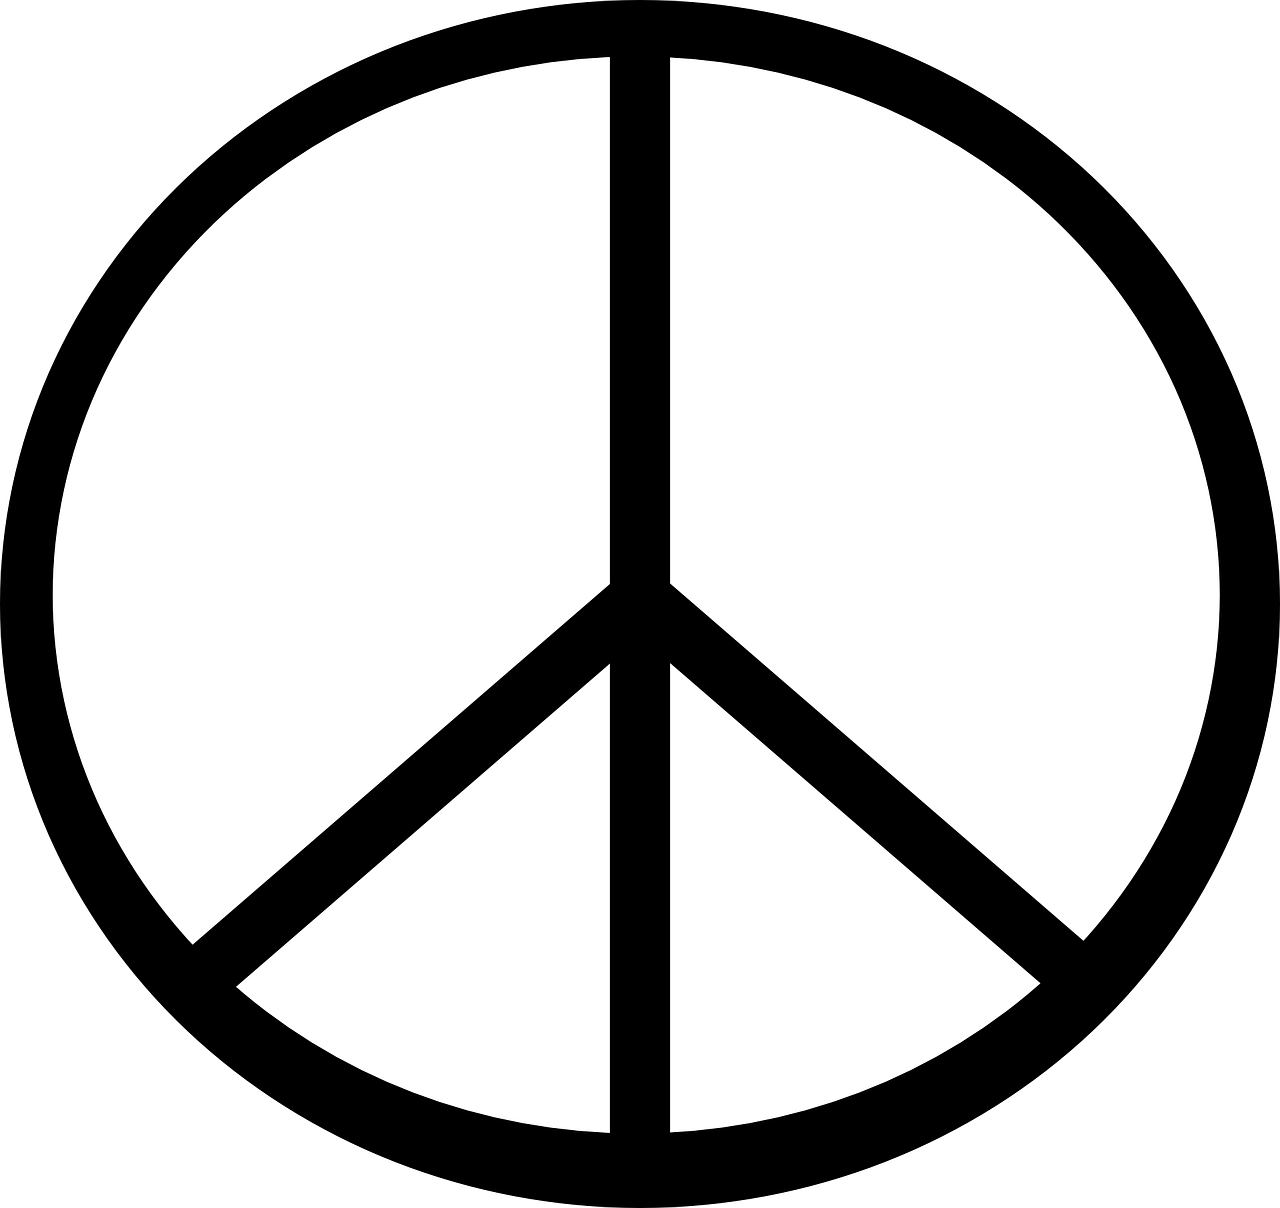 peace,symbol,sign,british nuclear disarmament,gerald holtom,semaphore,signals,black and white,icon,peaceful,free vector graphics,free pictures, free photos, free images, royalty free, free illustrations, public domain